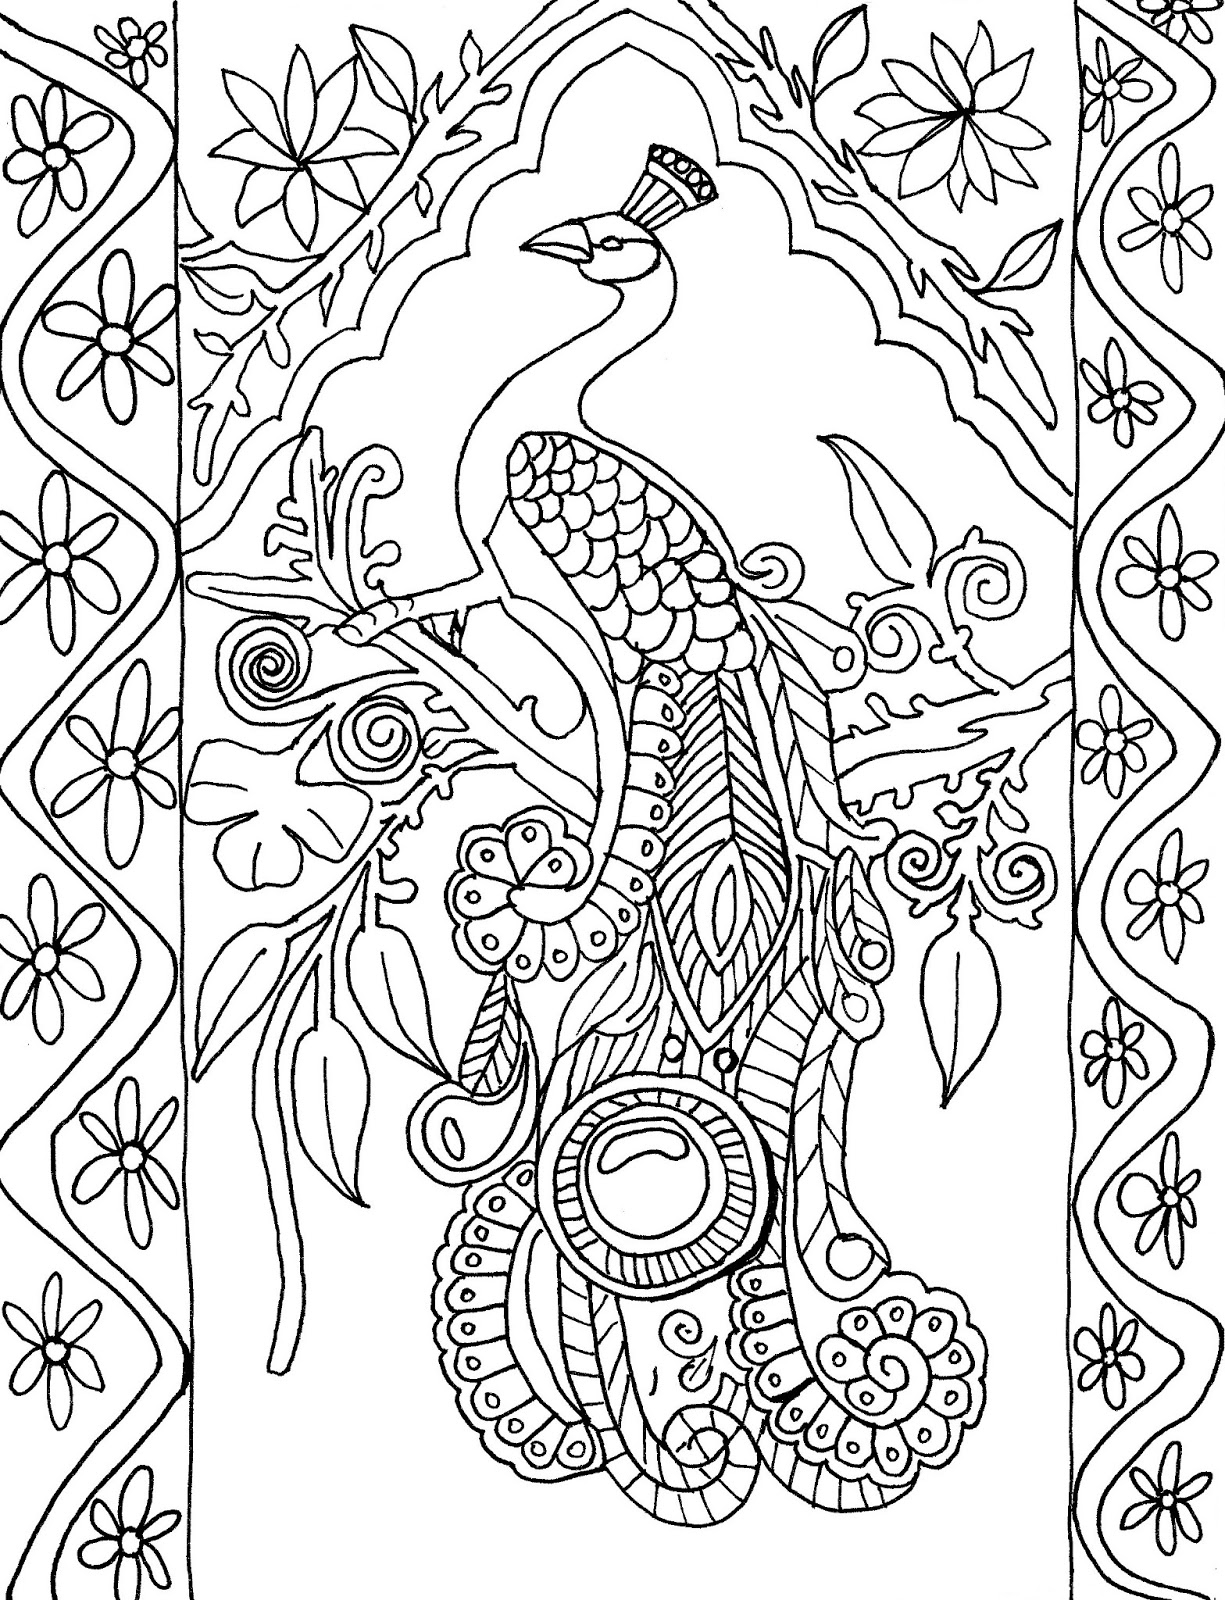 Peacock feathers coloring pages download and print for free